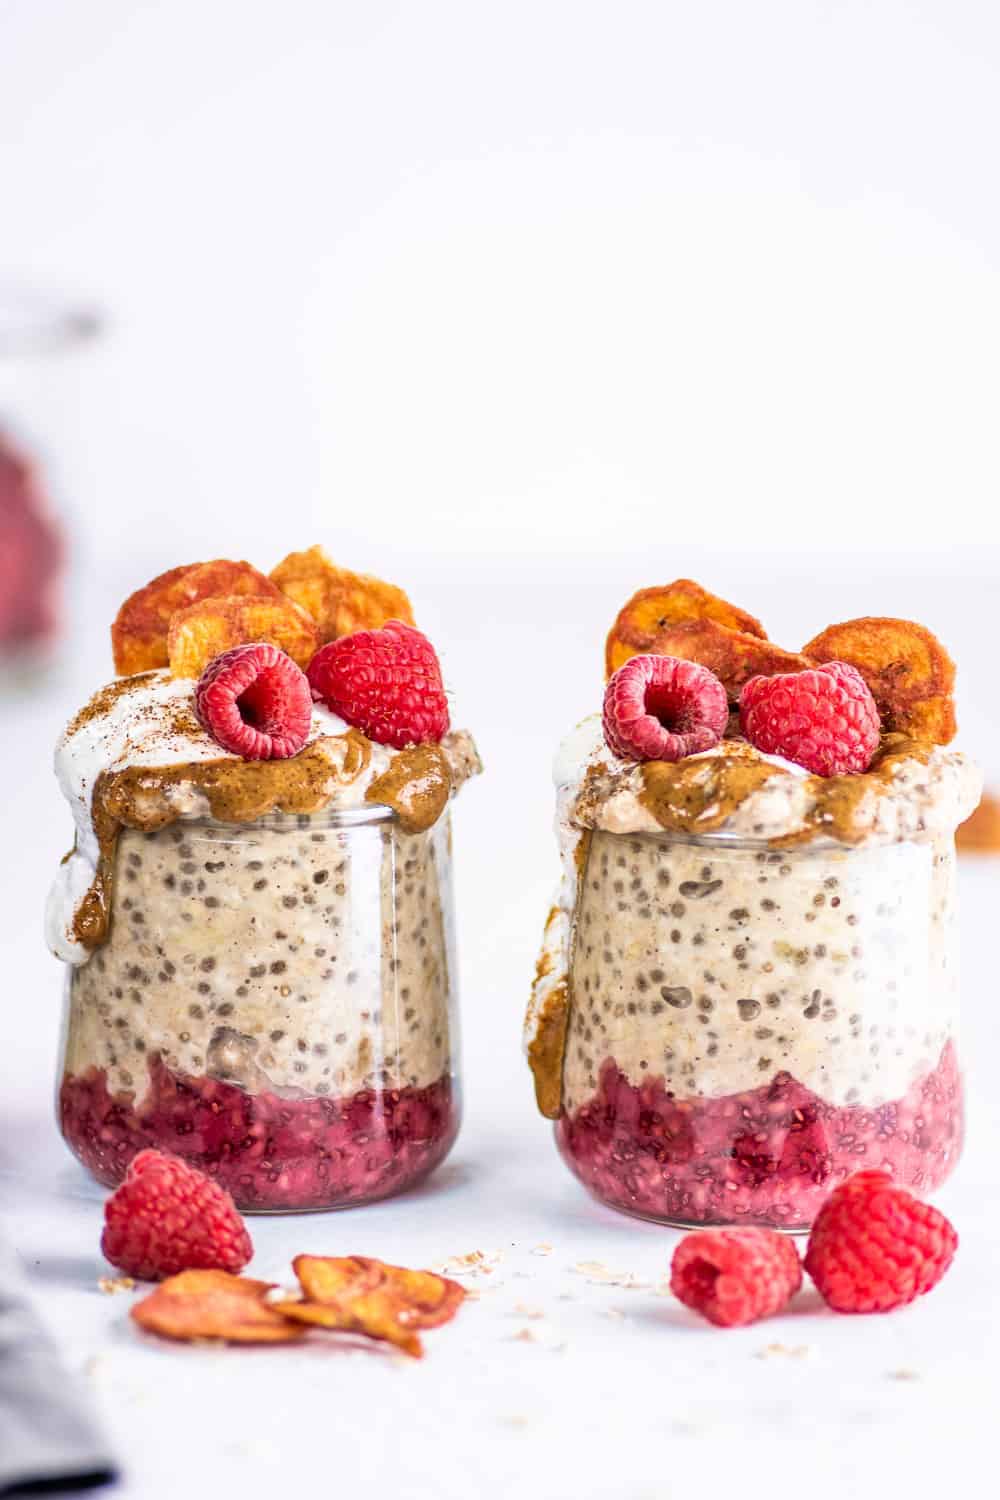 These easy banana overnight oats with chia seeds are vegan and gluten-free. Prep them in five minutes, and leave the rest of the work to the refrigerator. In the morning you have a delicious, nutritious breakfast waiting for you! Healthy and packed with fiber, this is an easy breakfast to take on the go. || The Butter Half #overnightoats #breakfast #vegan #glutenfree #thebutterhalf